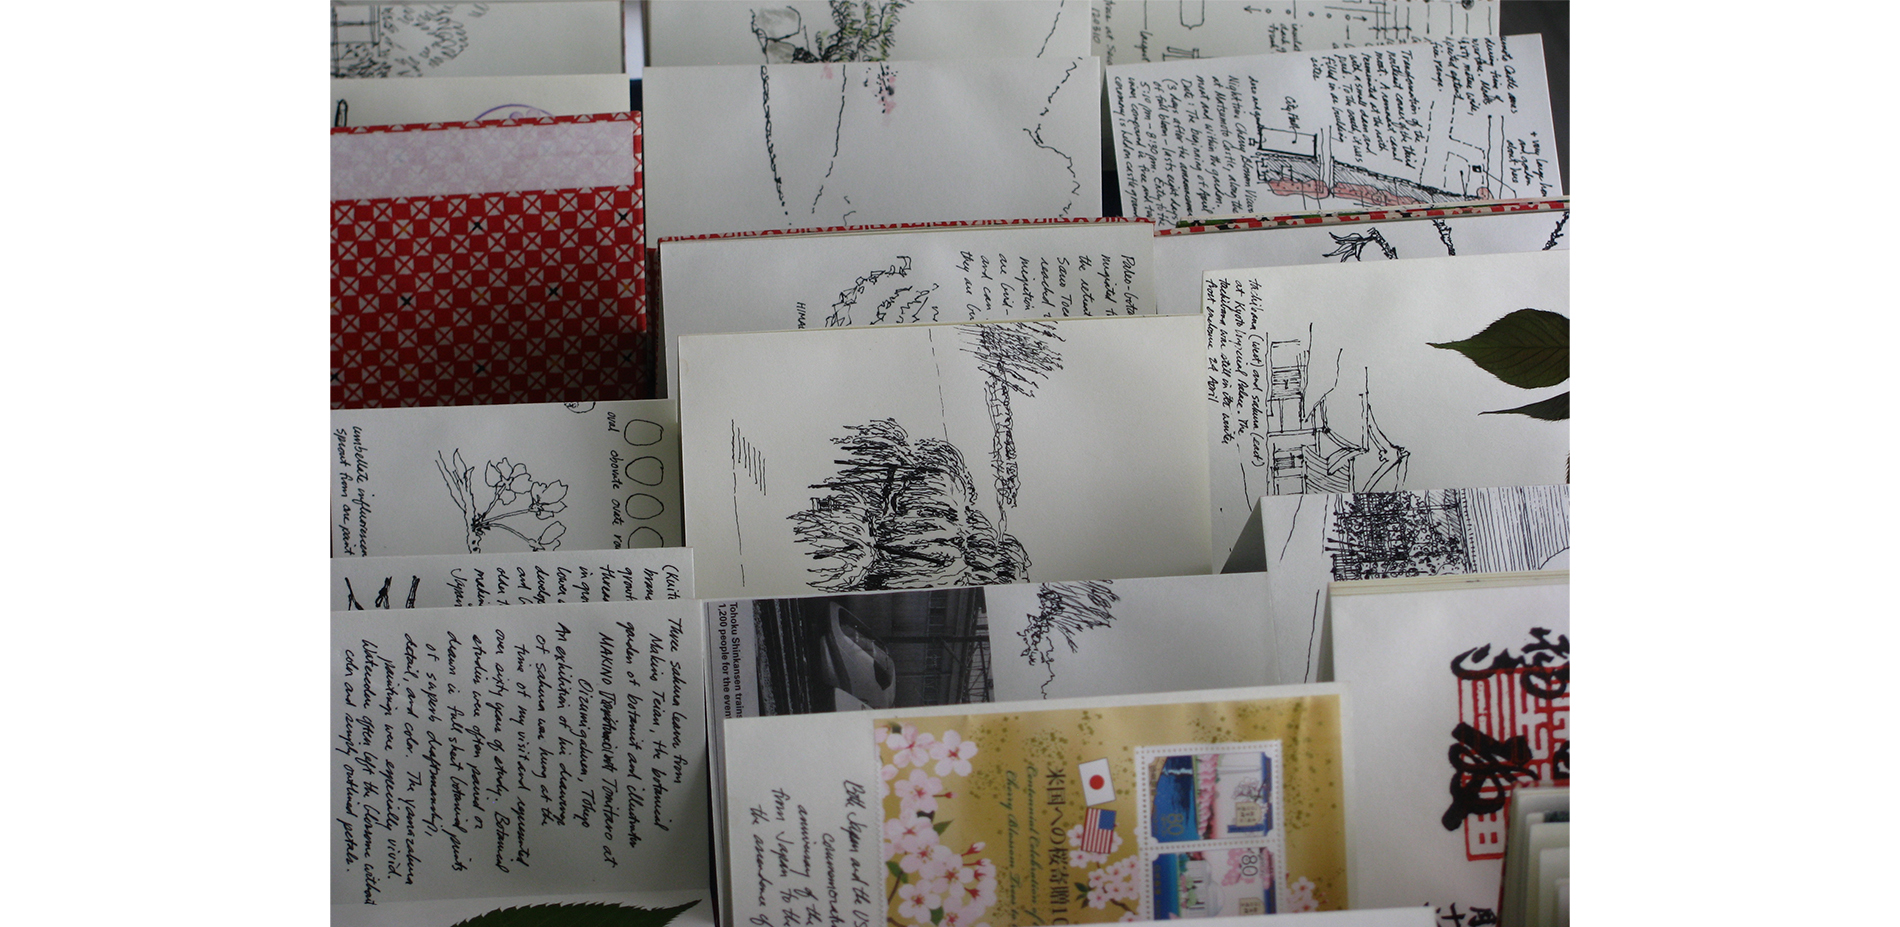 Fifteen orihon sketchbooks were completed during the fellowship to document cherry blossom culture in Japan.